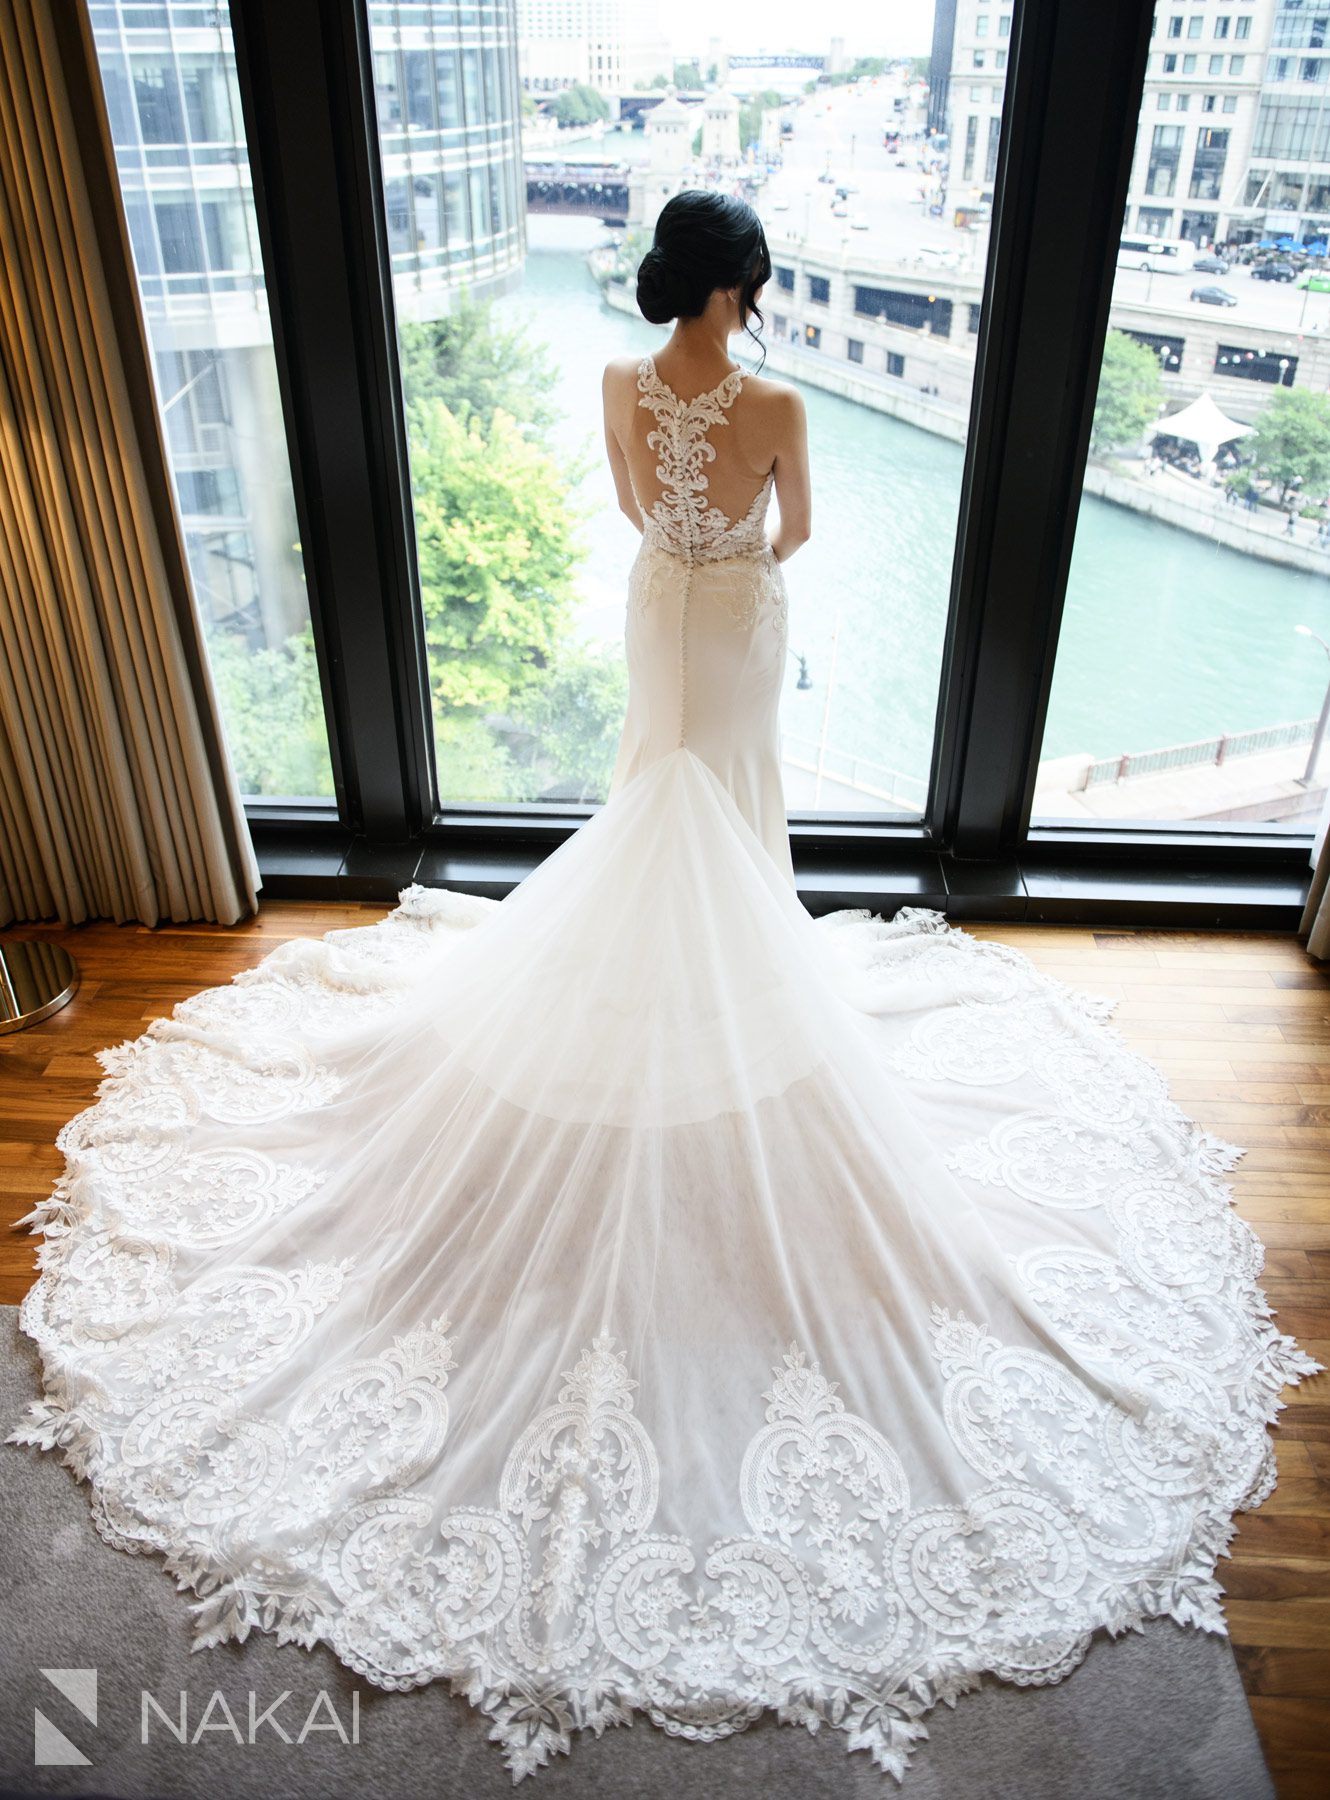 Langham Chicago wedding pictures getting ready details